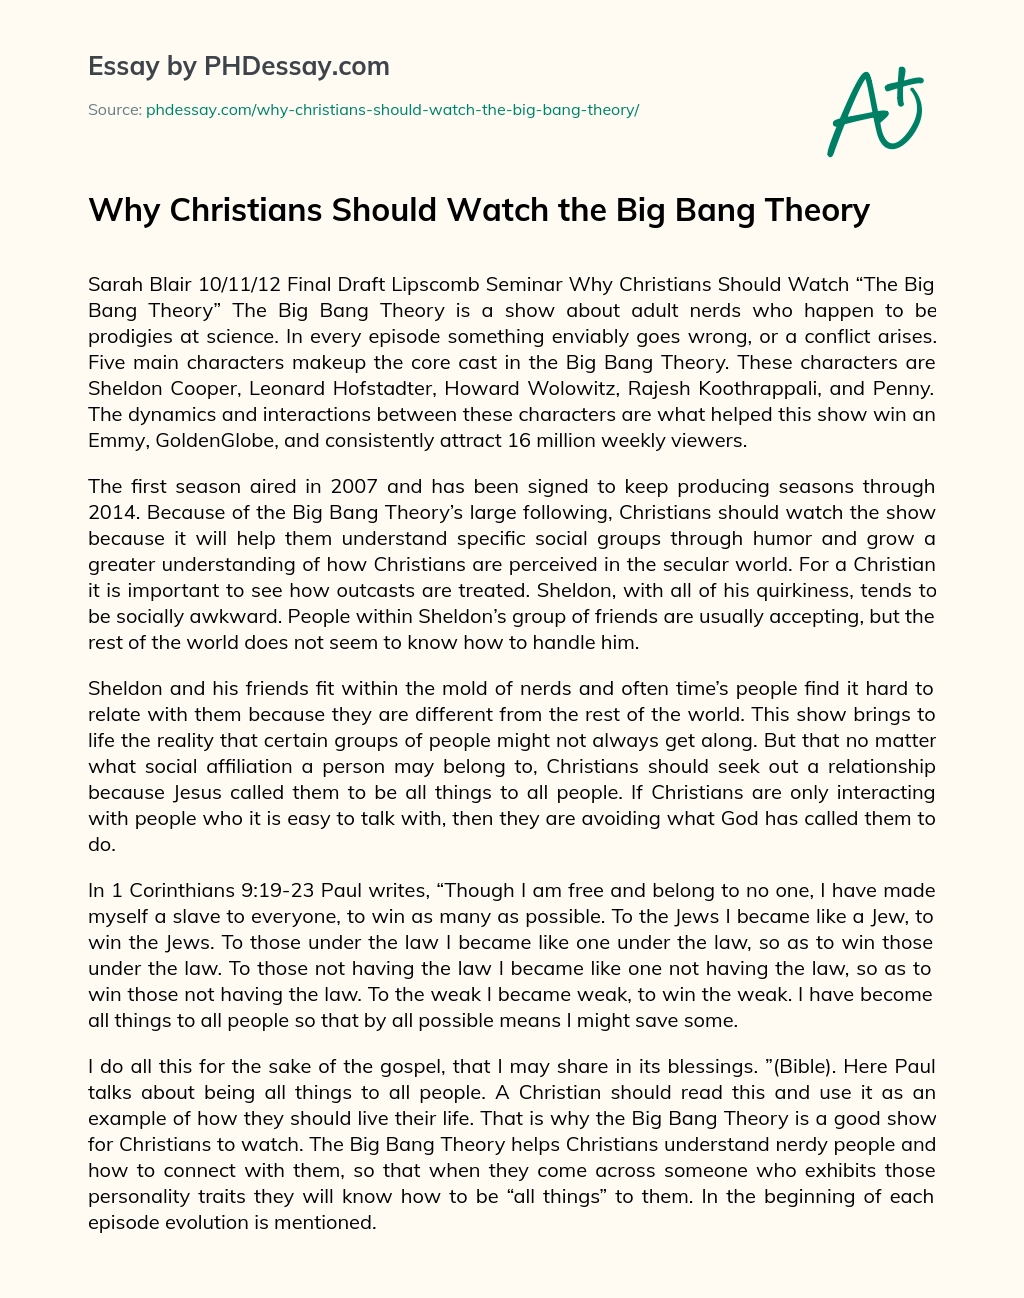 Why Christians Should Watch the Big Bang Theory essay